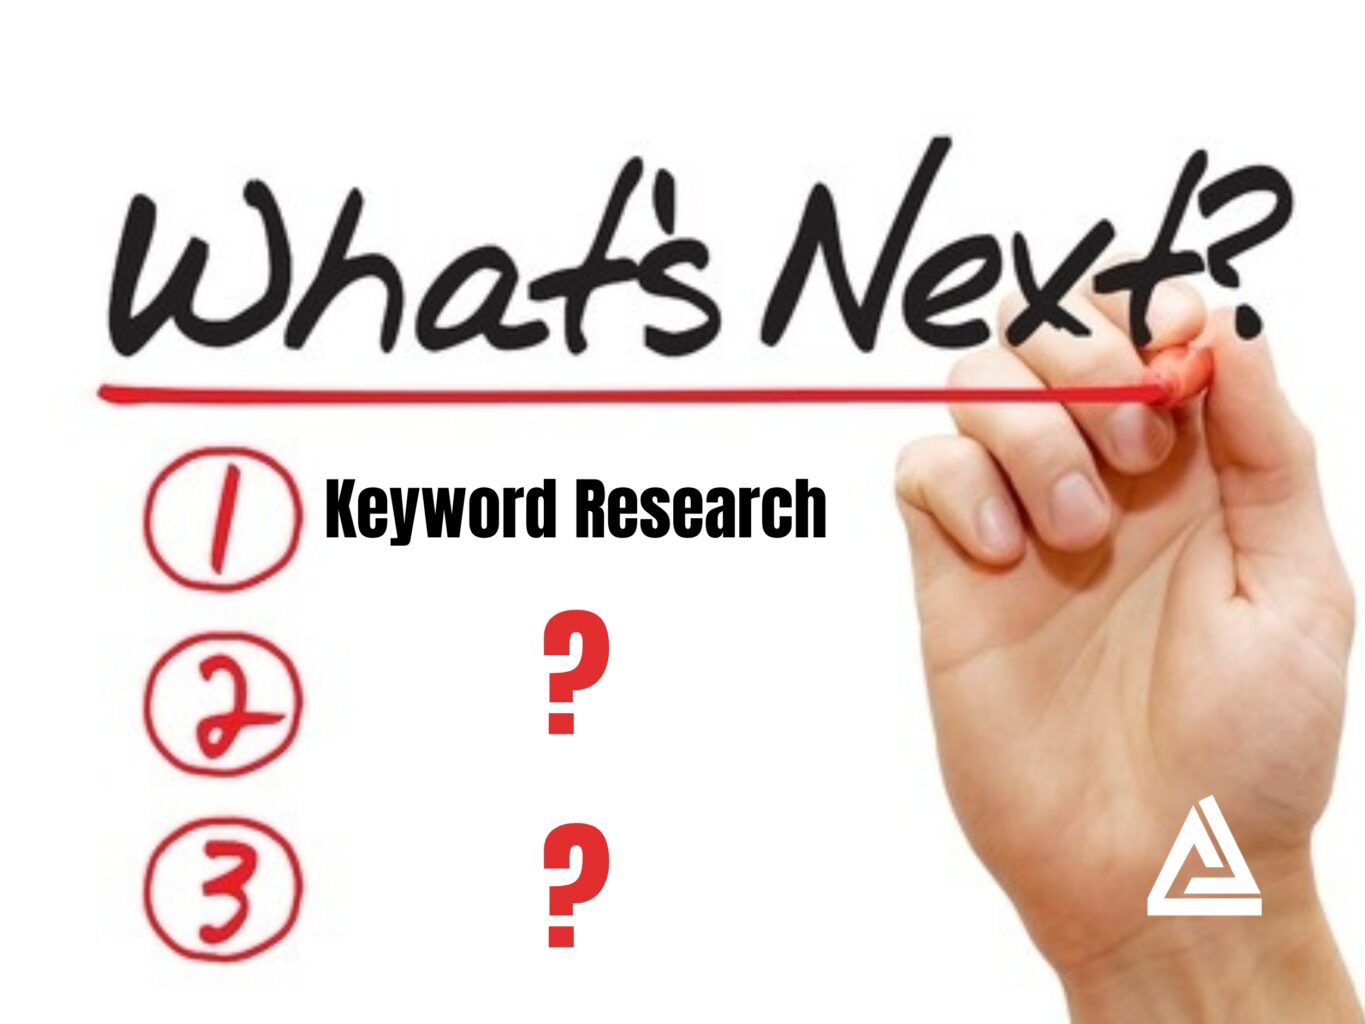 What to do after keyword research - Finding the next steps after researching the keywords